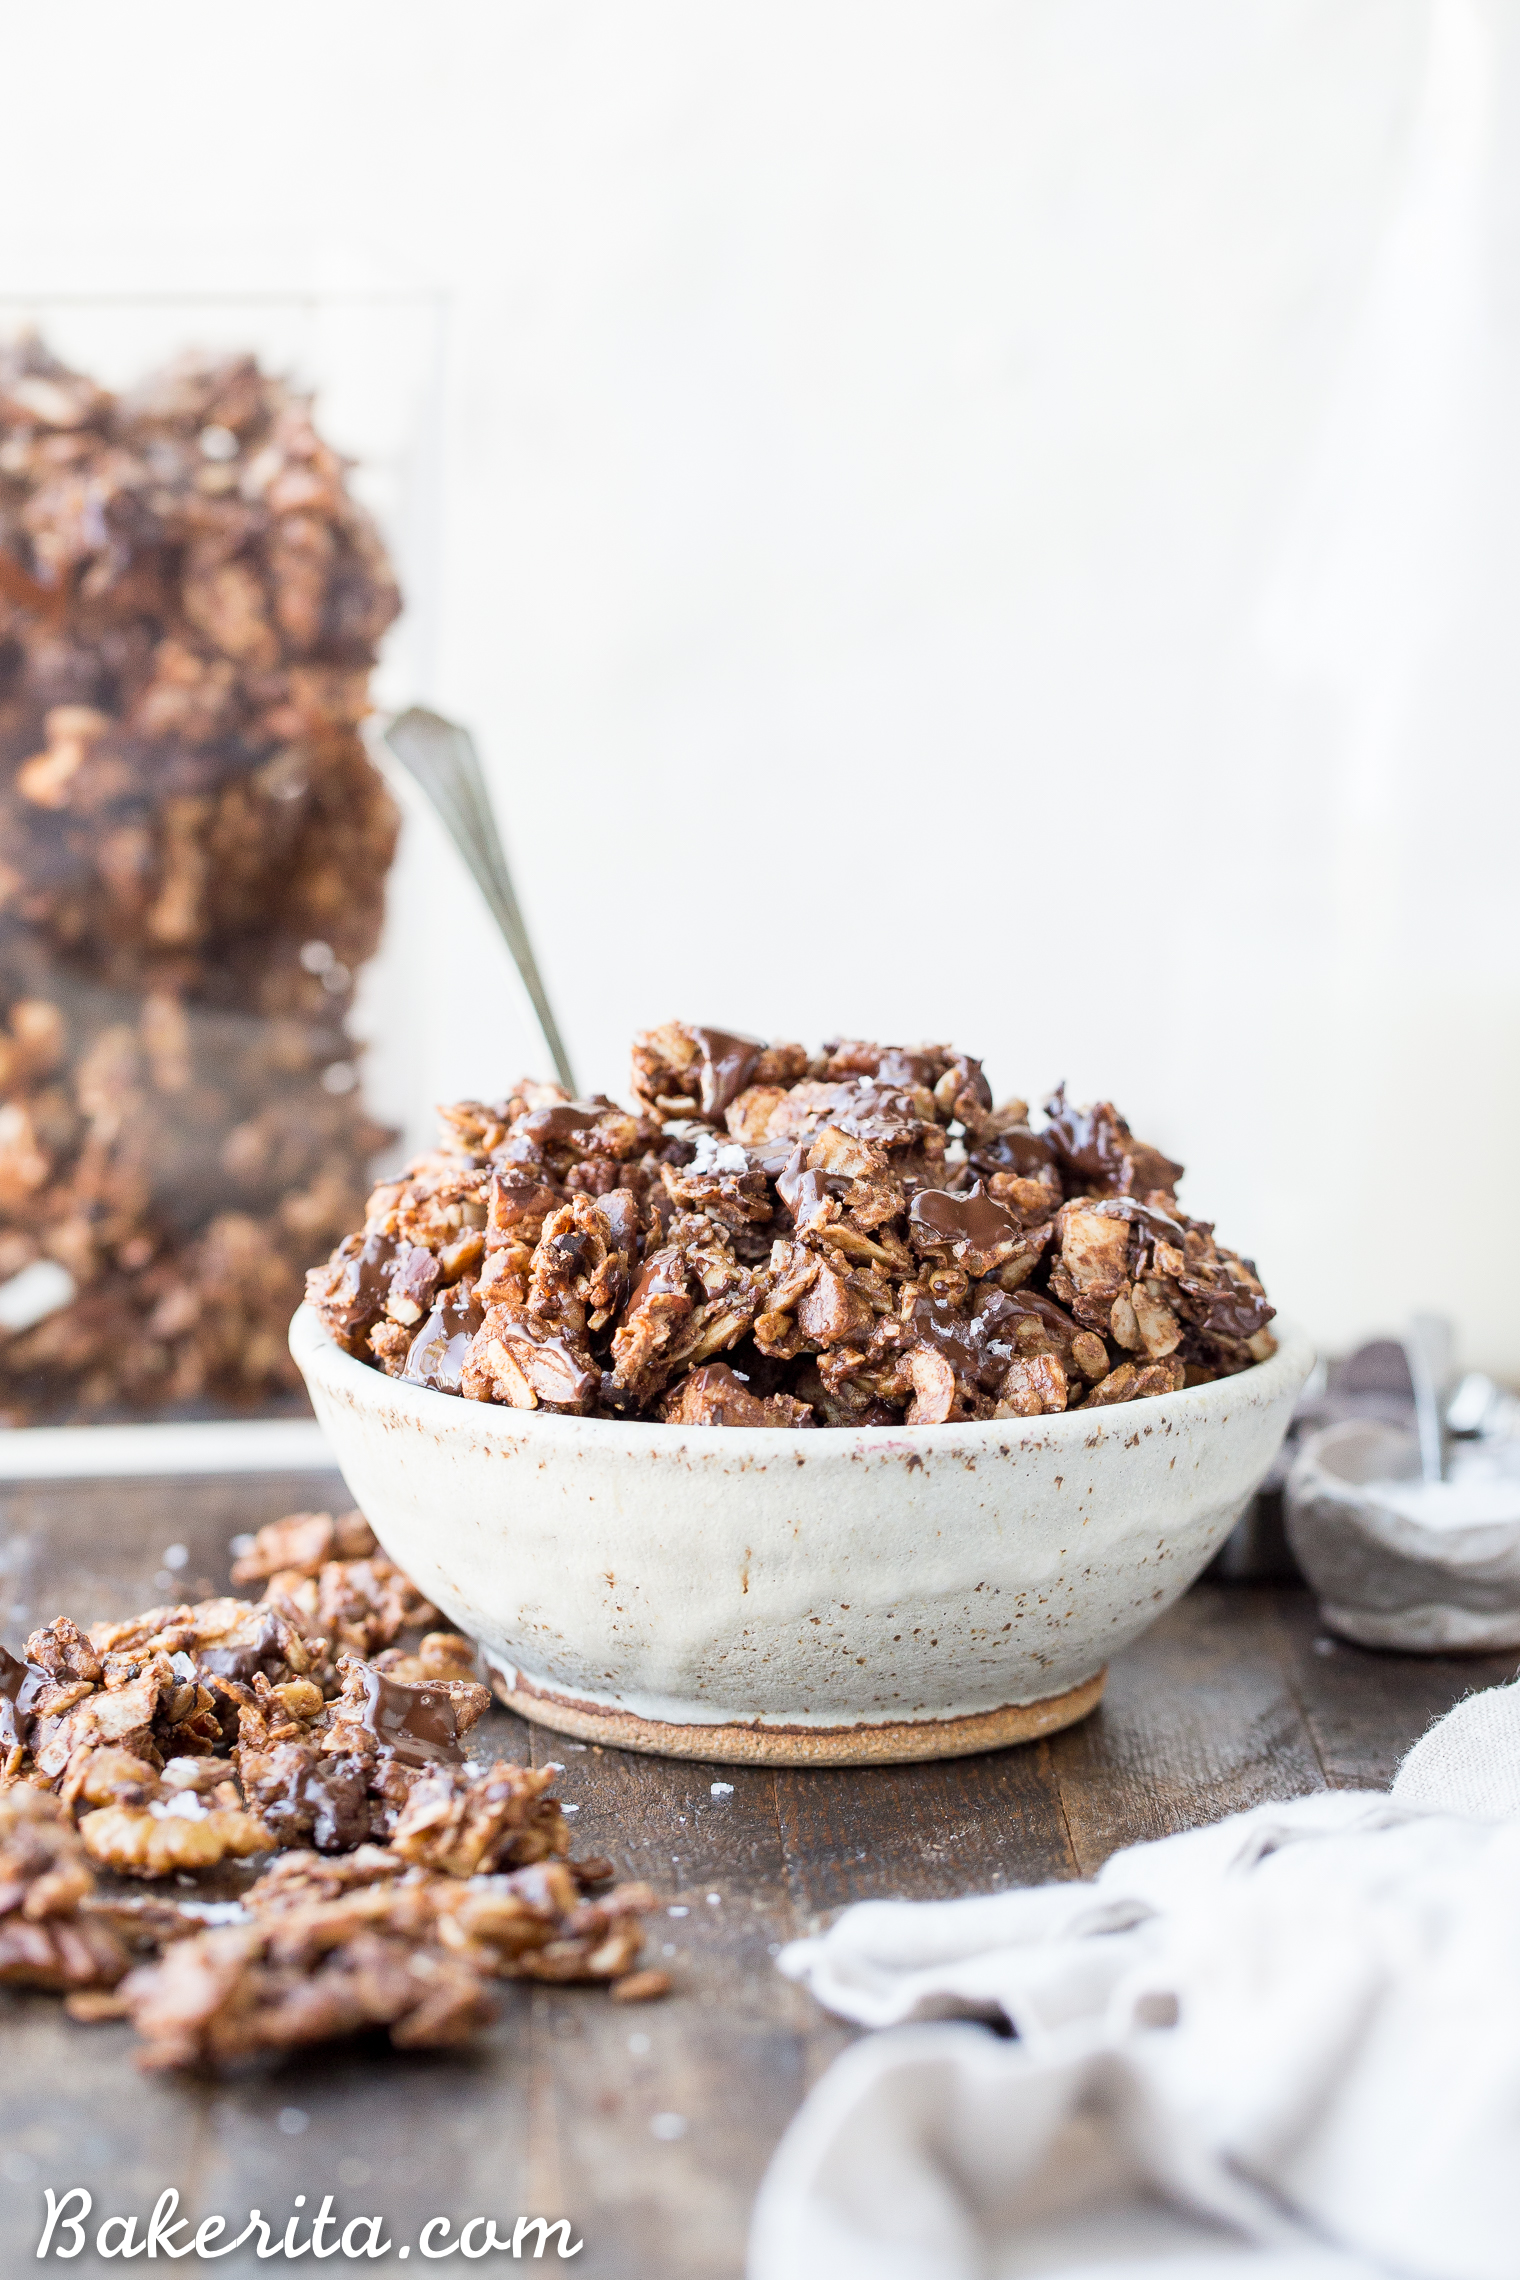 This Chunky Chocolate Grain-Free Granola is an easy and delicious breakfast or it can be eaten by the handful as a fueling snack. You certainly won't miss the grains in this gluten-free, refined sugar-free, and paleo granola.